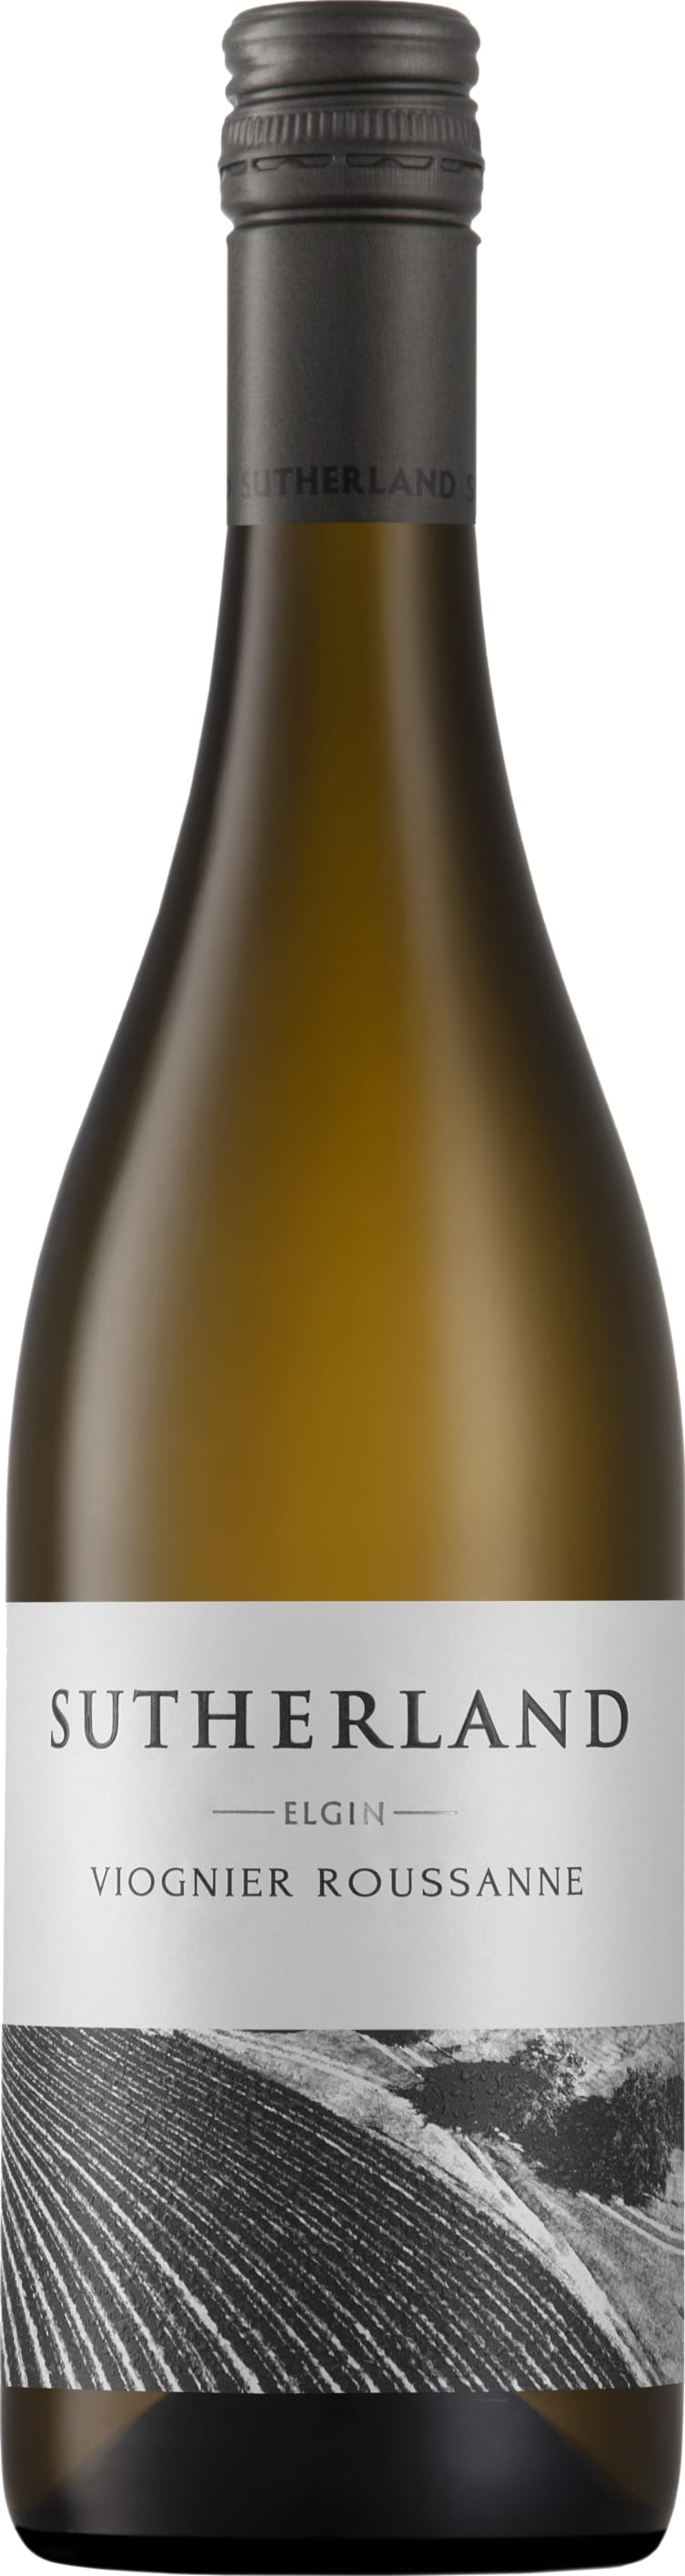 Thelema Mountain Vineyards Sutherland Viognier Roussanne 2022 75cl - Buy Thelema Mountain Vineyards Wines from GREAT WINES DIRECT wine shop